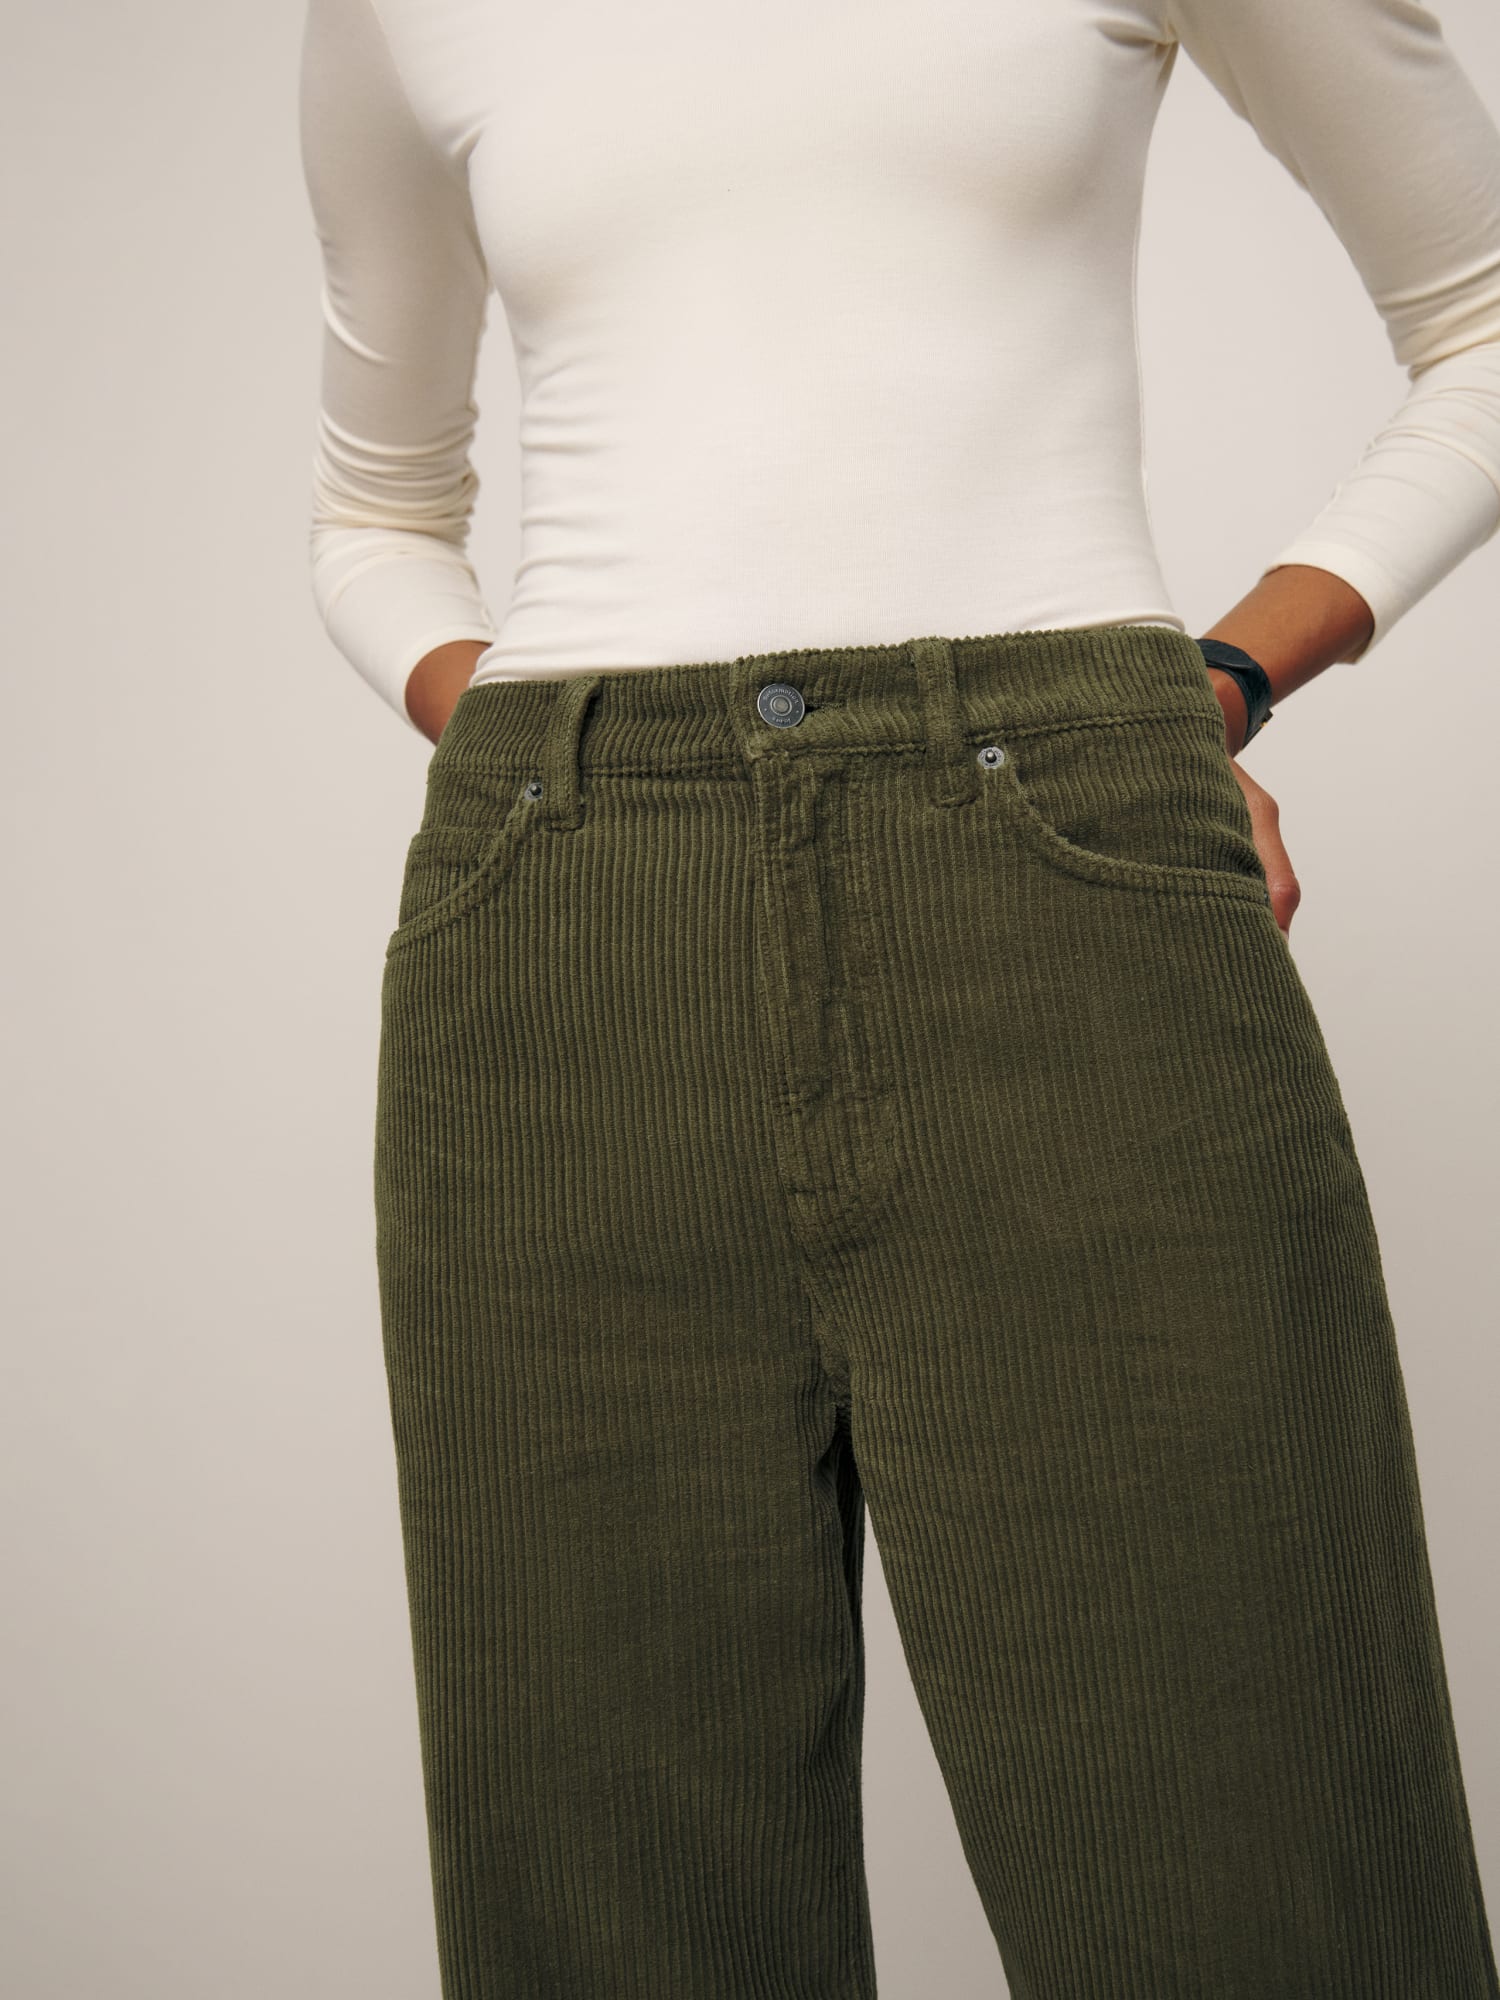 Cary High Rise Slouchy Wide Leg Corduroy Pants - Sustainable Denim